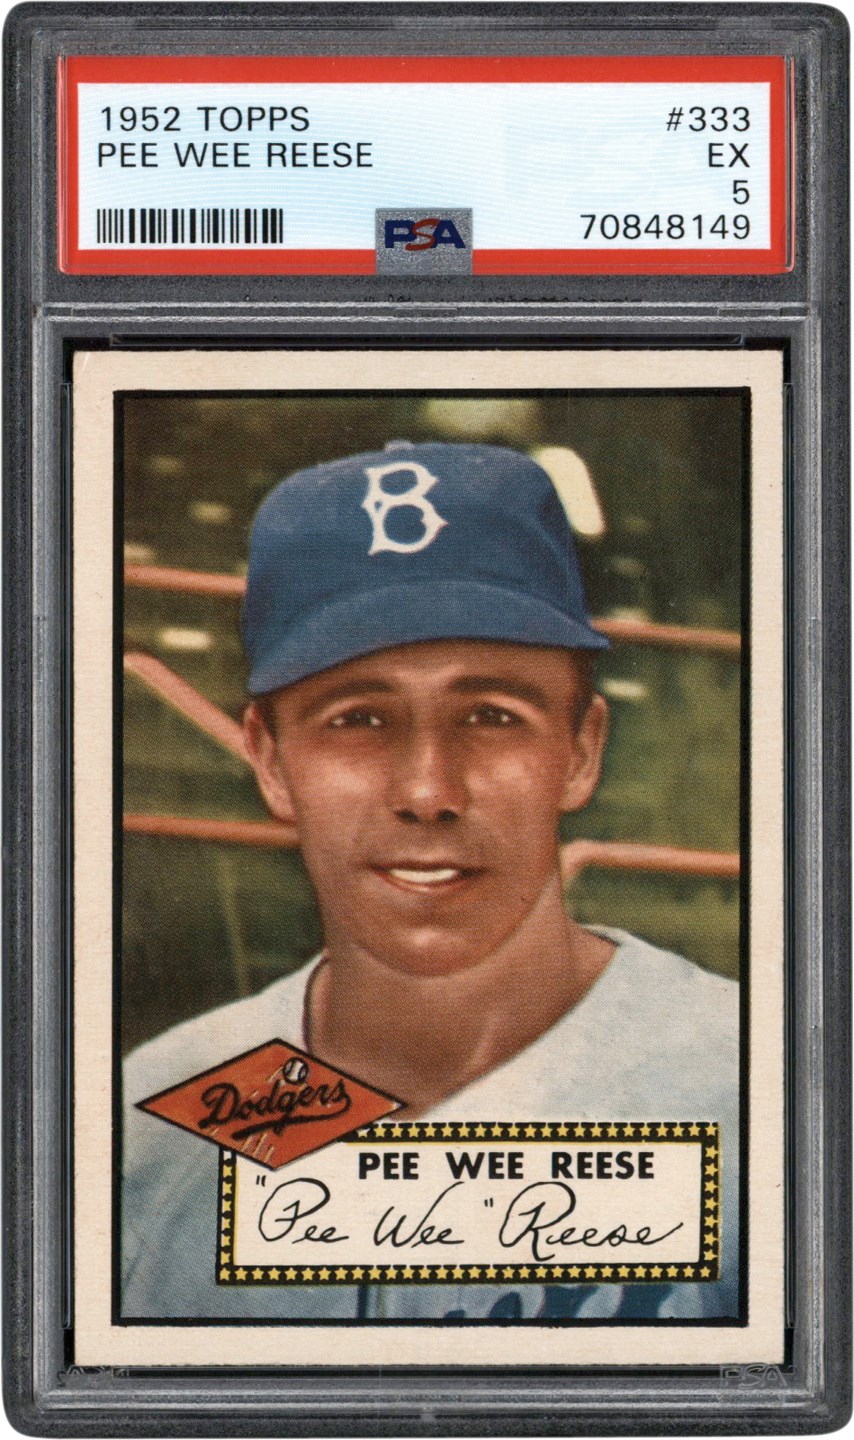 1952 Topps #333 Pee Wee Reese PSA EX 5 - Newly Discovered Example